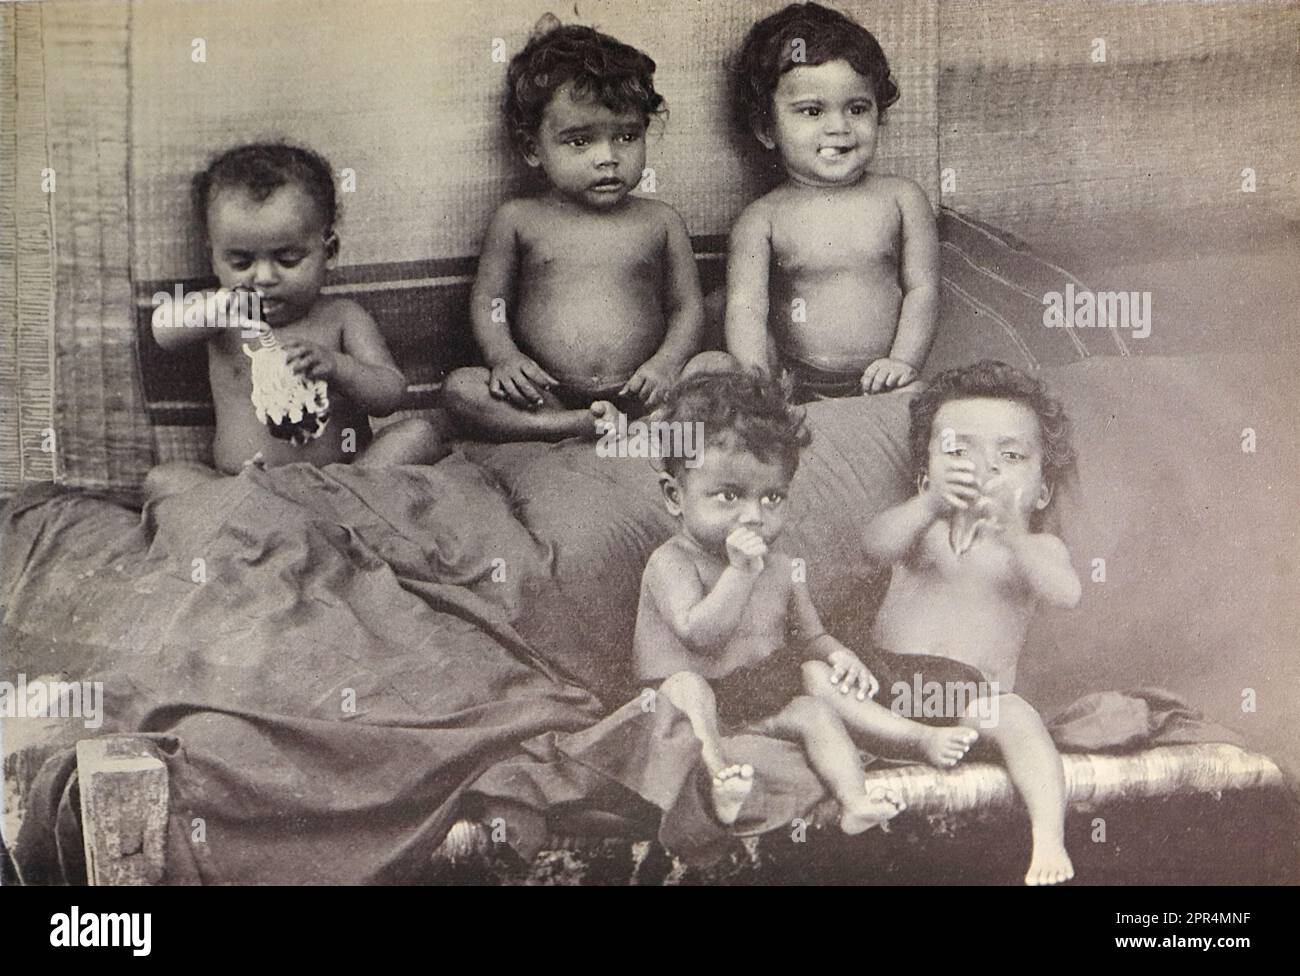 A group of five young children. In the Dohnavur compound. Half-tone engraving from a photograph by Mr. Penn of Ootacamund (now known as Ooto), in the Tamil Nadu region of Southern India, c1912. The image relates to the Church of England Zenana Mission’s nursery and compound in Dohnavur, also in Tamil Nadu and about thirty miles from the southern tip of India. The compound was run by Amy Wilson-Carmichael and sought to promote Christianity among babies and children (at the time only girls, many who were victims of temple prostitution). Stock Photo